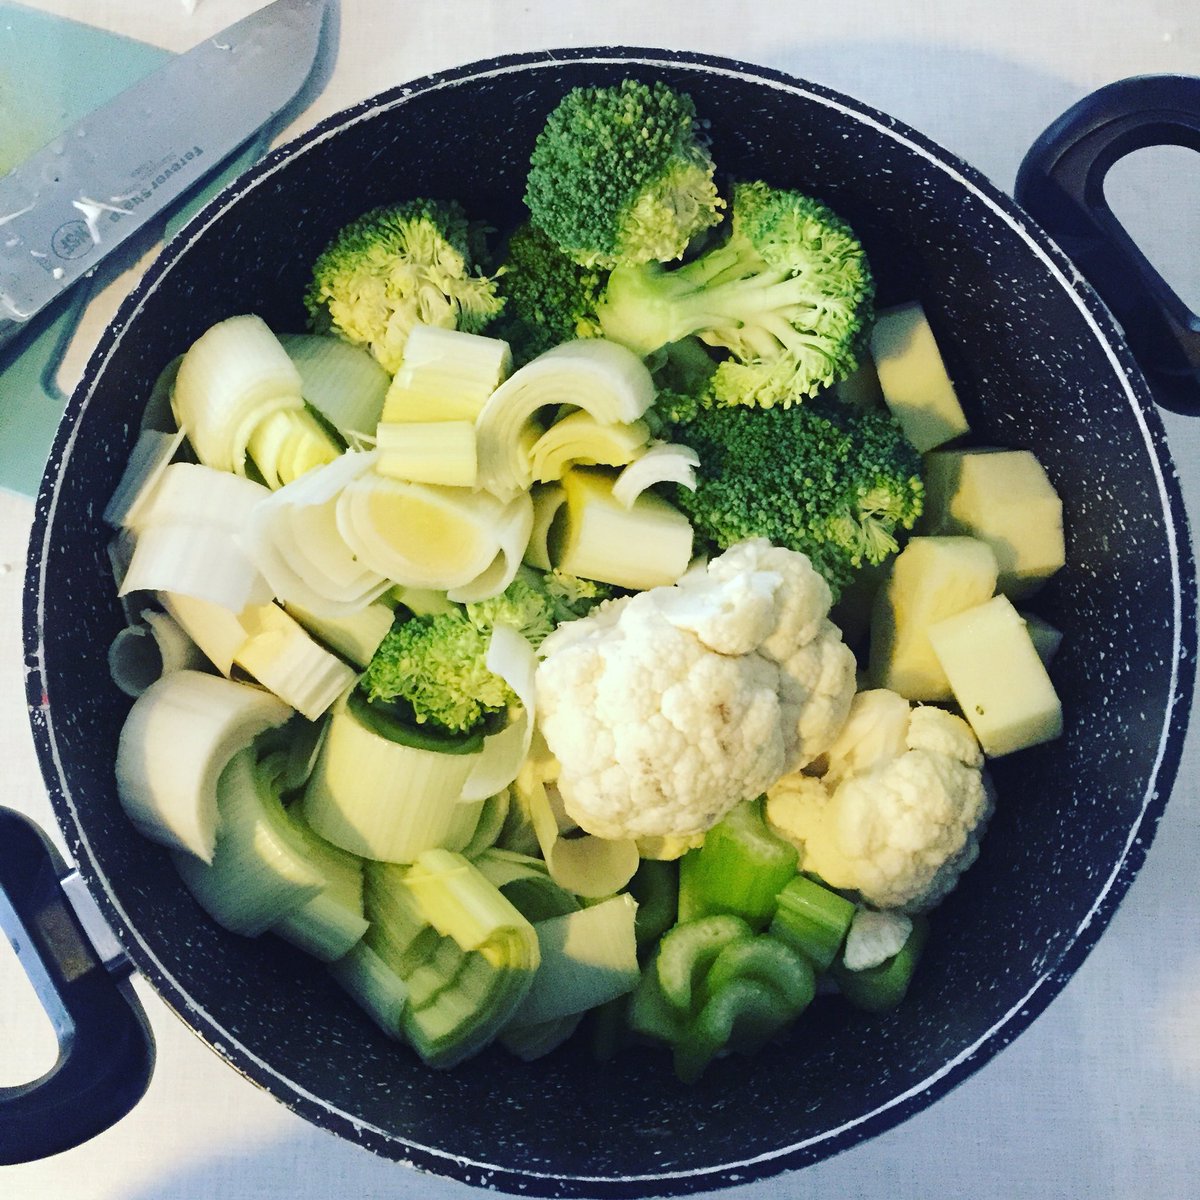 Whipping up a yummy pot of green Goddess soup aka using up all the old and rubbery leftover veggies lurking at the bottom of the fridge 😂 #soups #noleftovers #frugalliving